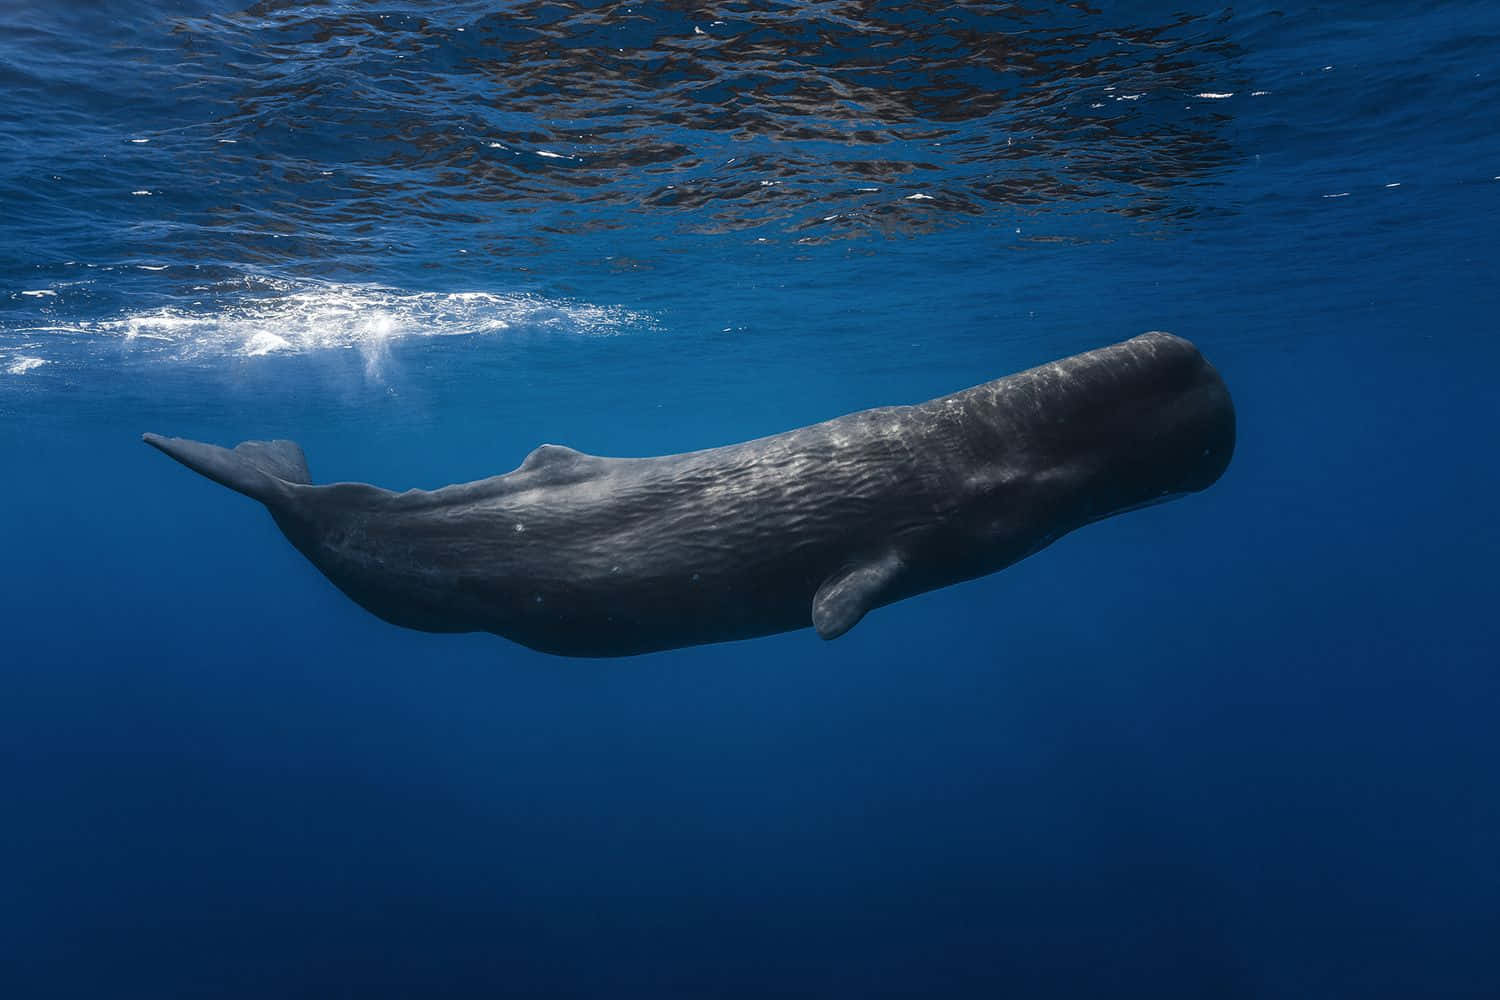 A magnificent sperm whale in the wild